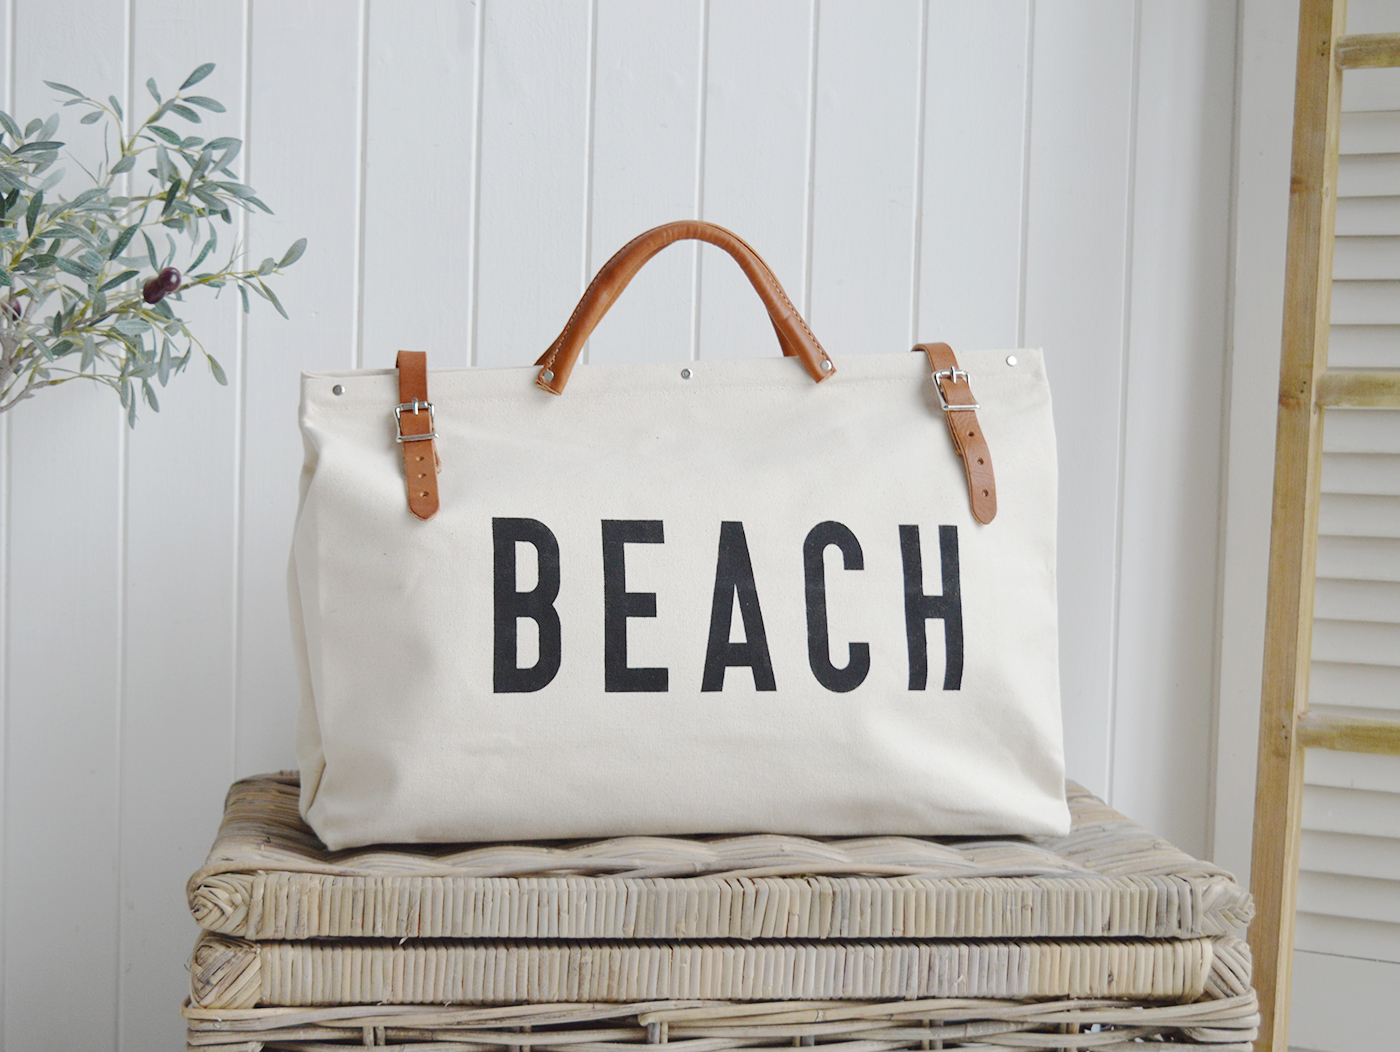 Nautical Coastal Furniture, lifestyle and accessories for the home. New England Lifestyle - Natural Beach Canvas Utility Bag